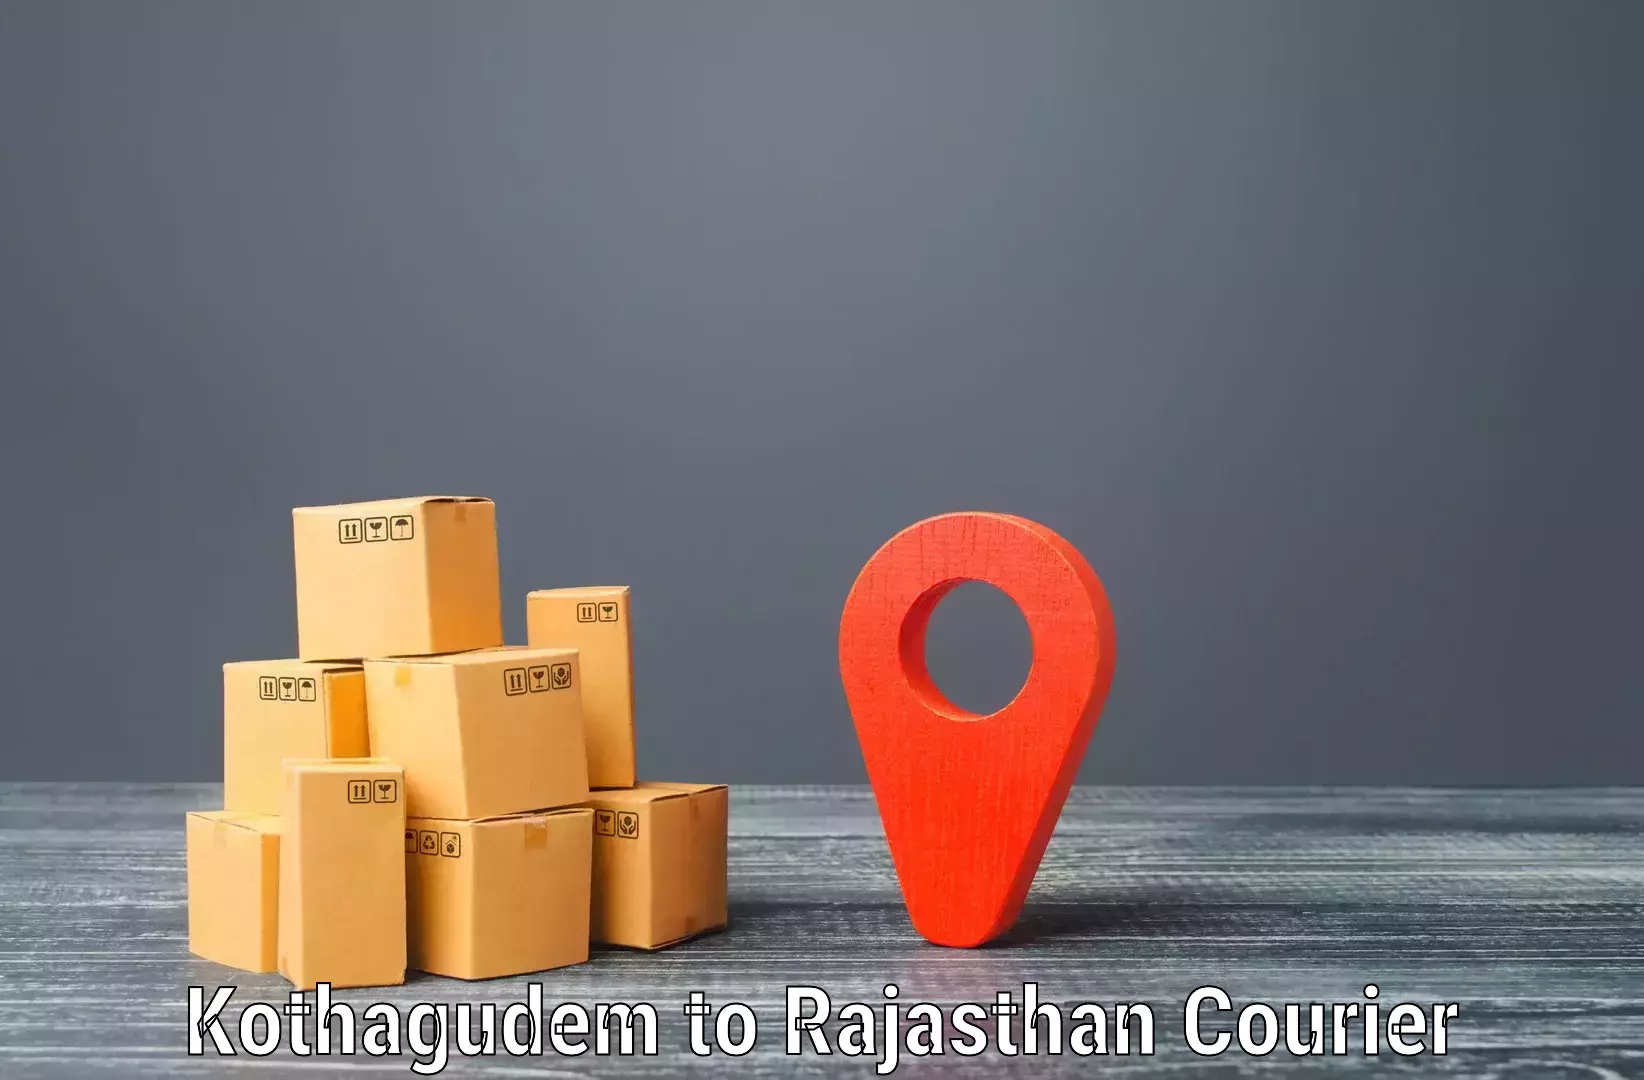 Advanced shipping network Kothagudem to Udaipur